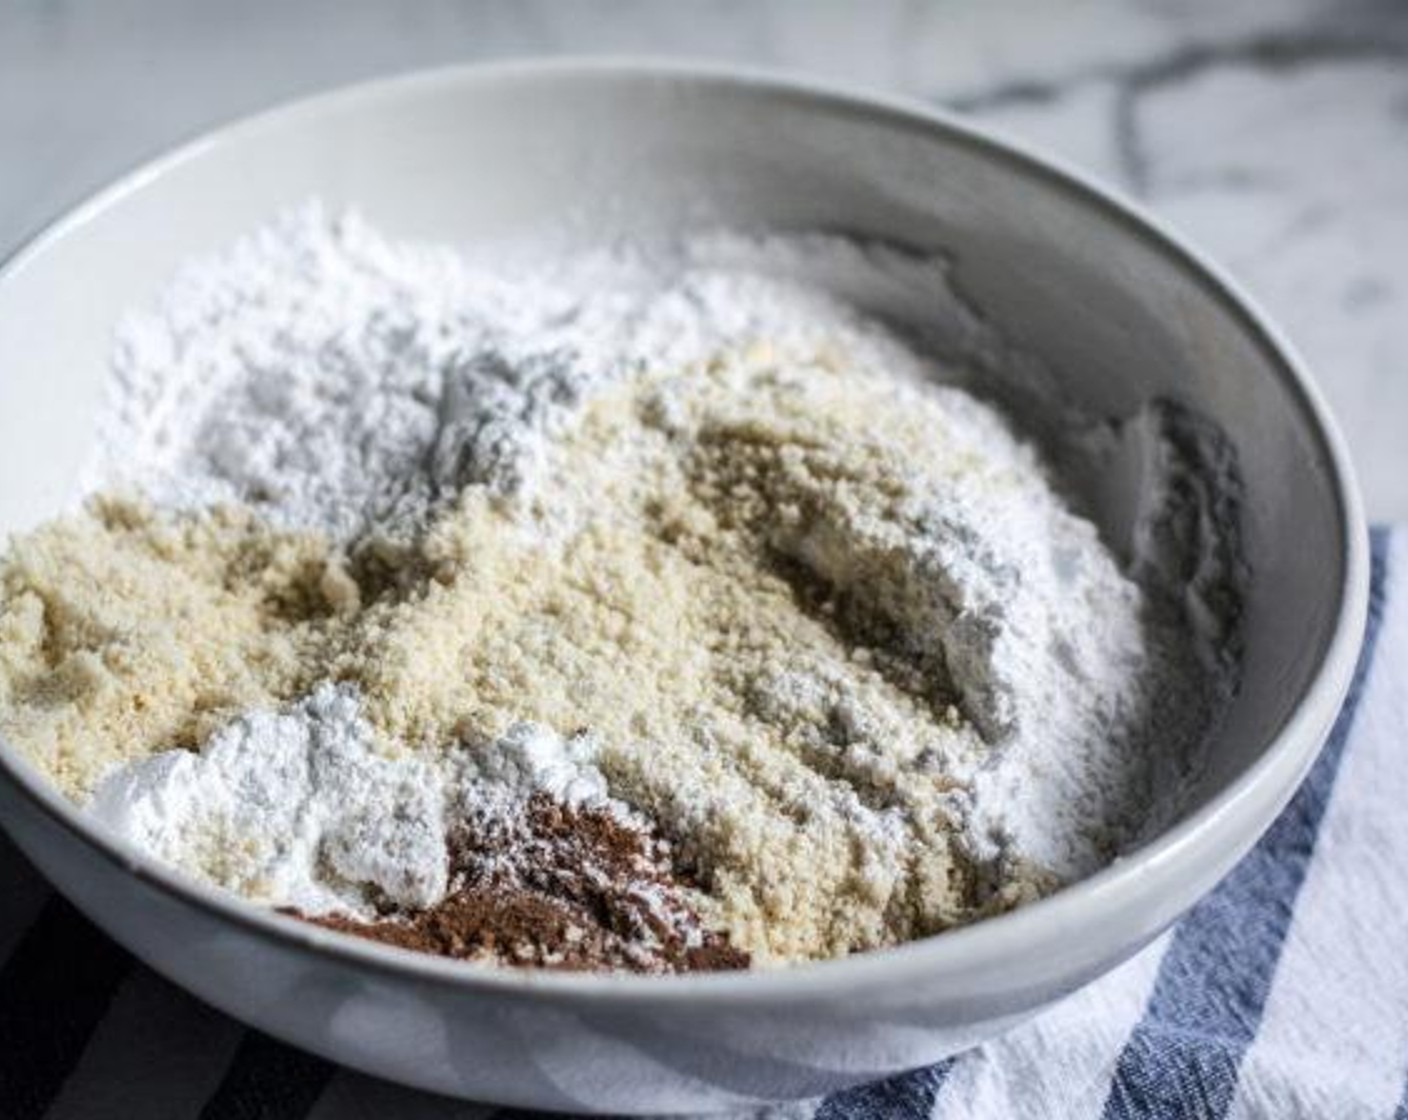 step 2 Add Almond Flour (3 cups), Tapioca Starch (1 cup), Baking Powder (1/2 Tbsp), Ground Cinnamon (1 tsp) and Sea Salt (1/8 tsp), to a medium bowl, whisk to combine and set aside.